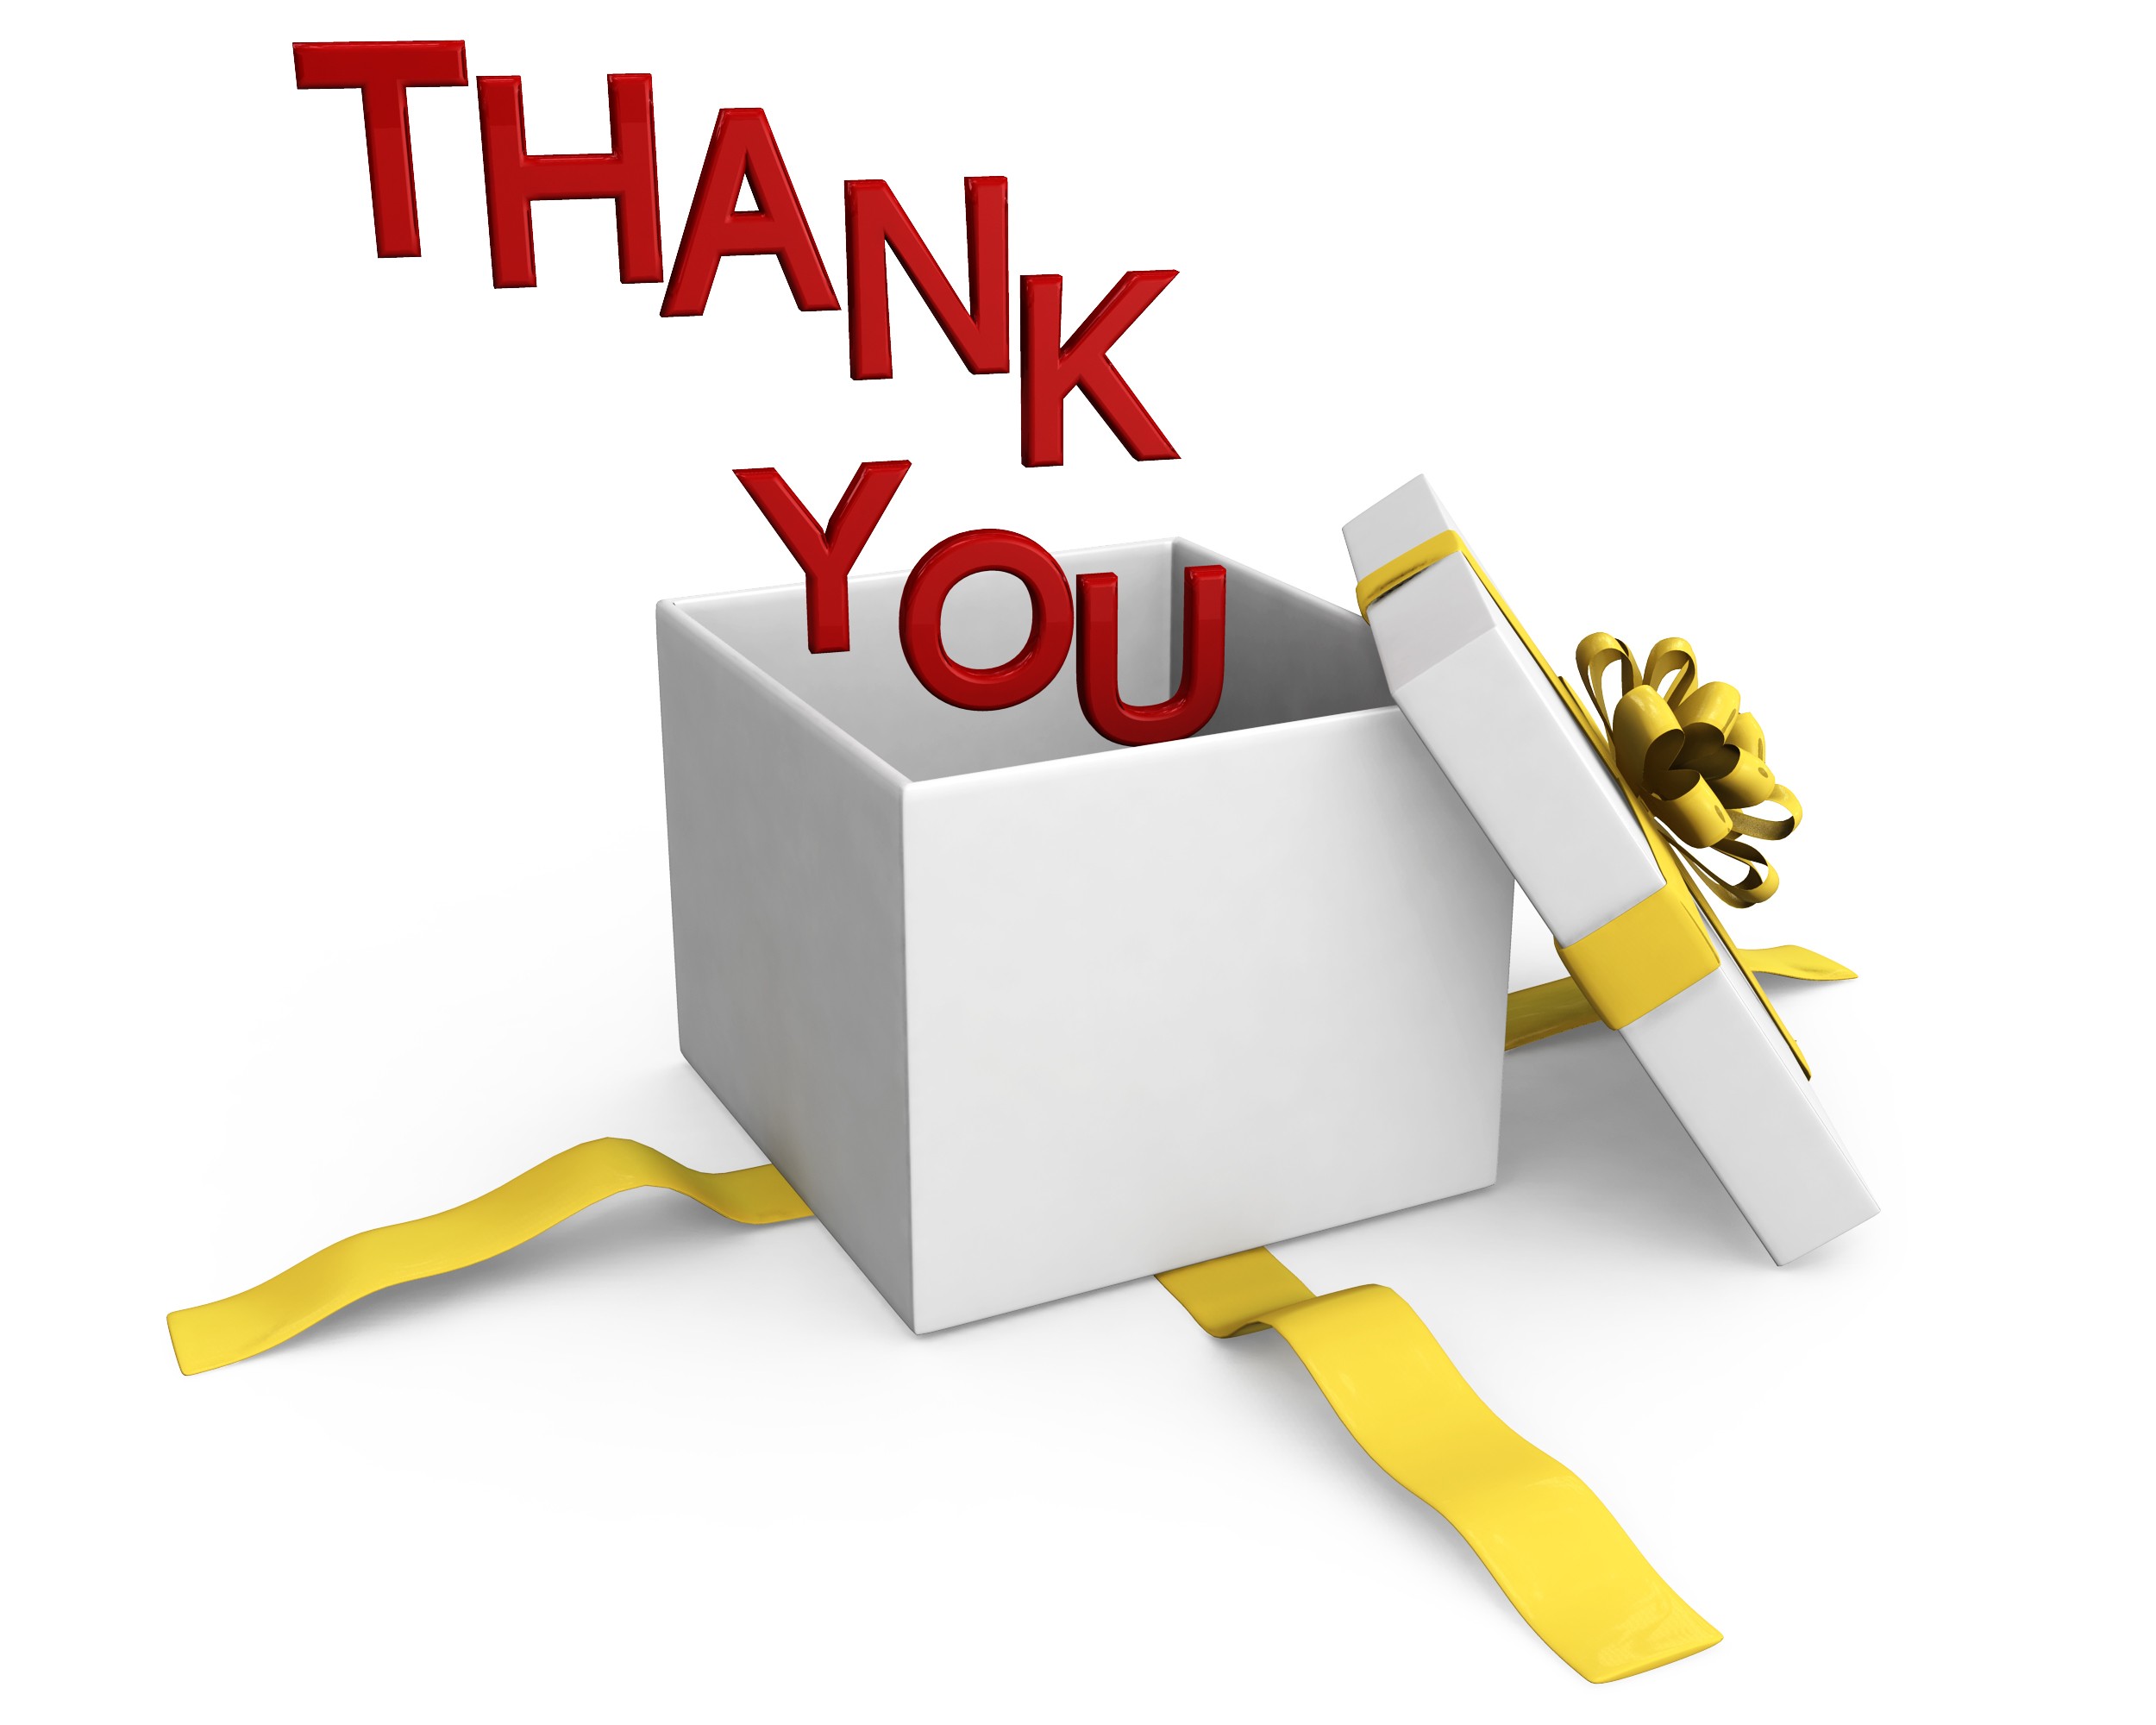 BEST THANK YOU PAGE ON PPT - ClipArt Best